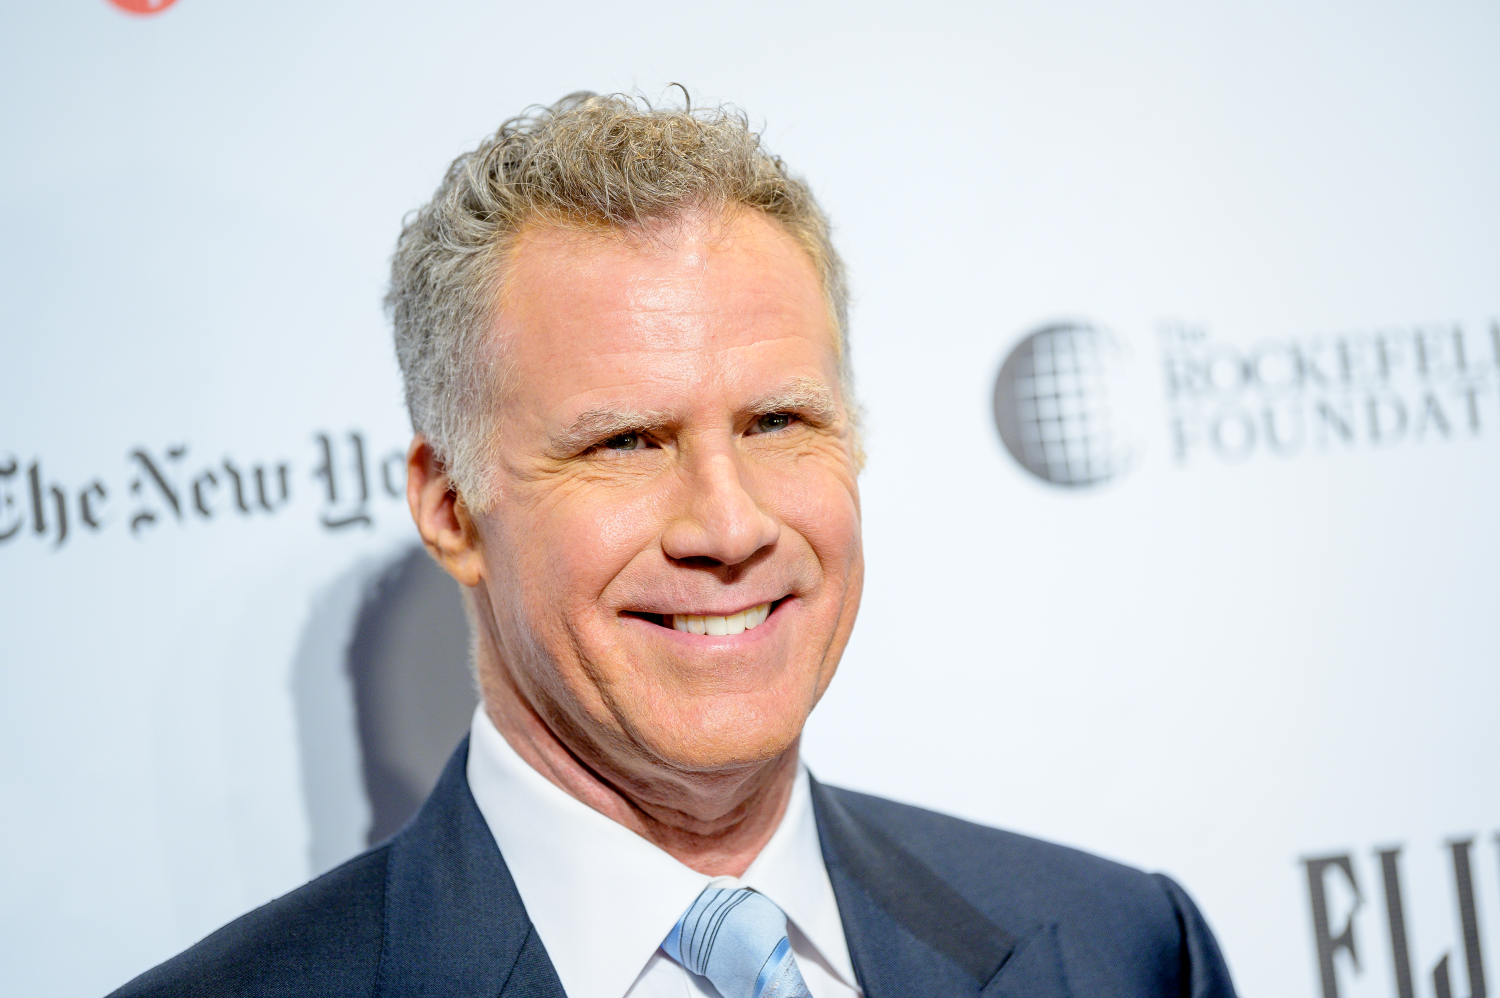 Will Ferrell attends the 2019 IFP Gotham Awards at Cipriani Wall Street